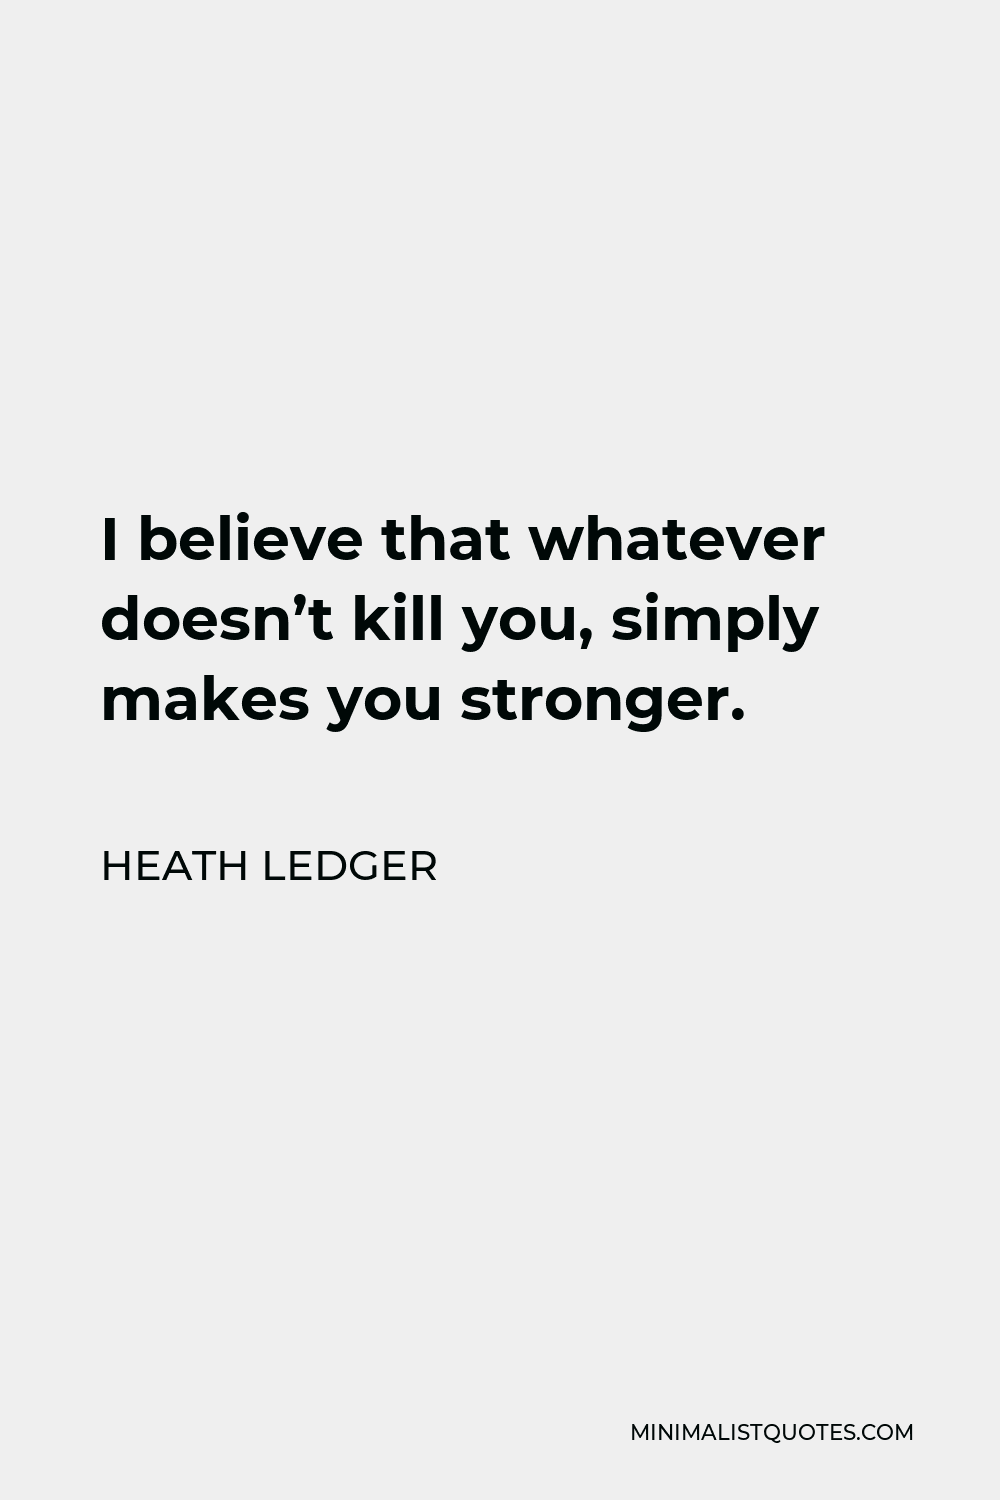 Heath Ledger Quote - I believe that whatever doesn’t kill you, simply makes you stronger.